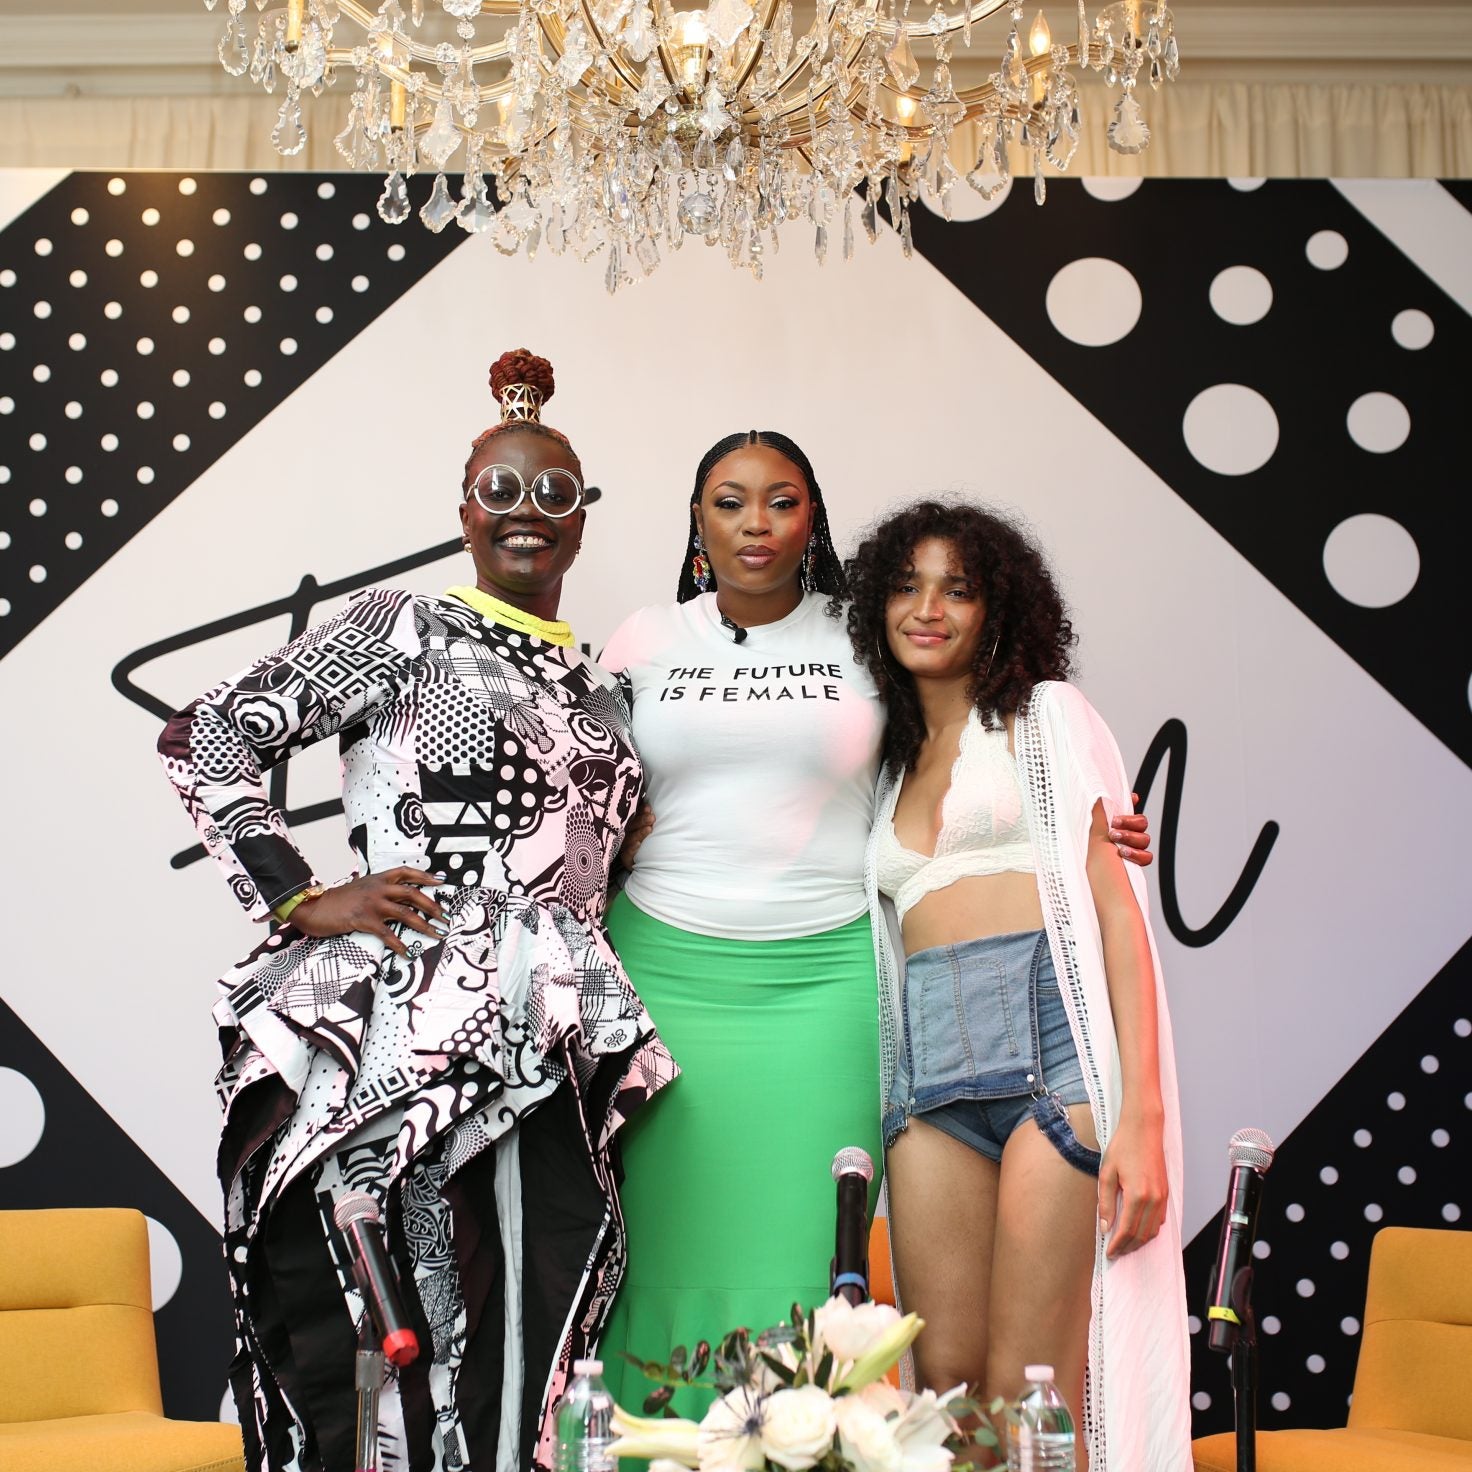 Indya Moore And Liris Crosse Talk About Creating A More Inclusive World At Essence Fashion House